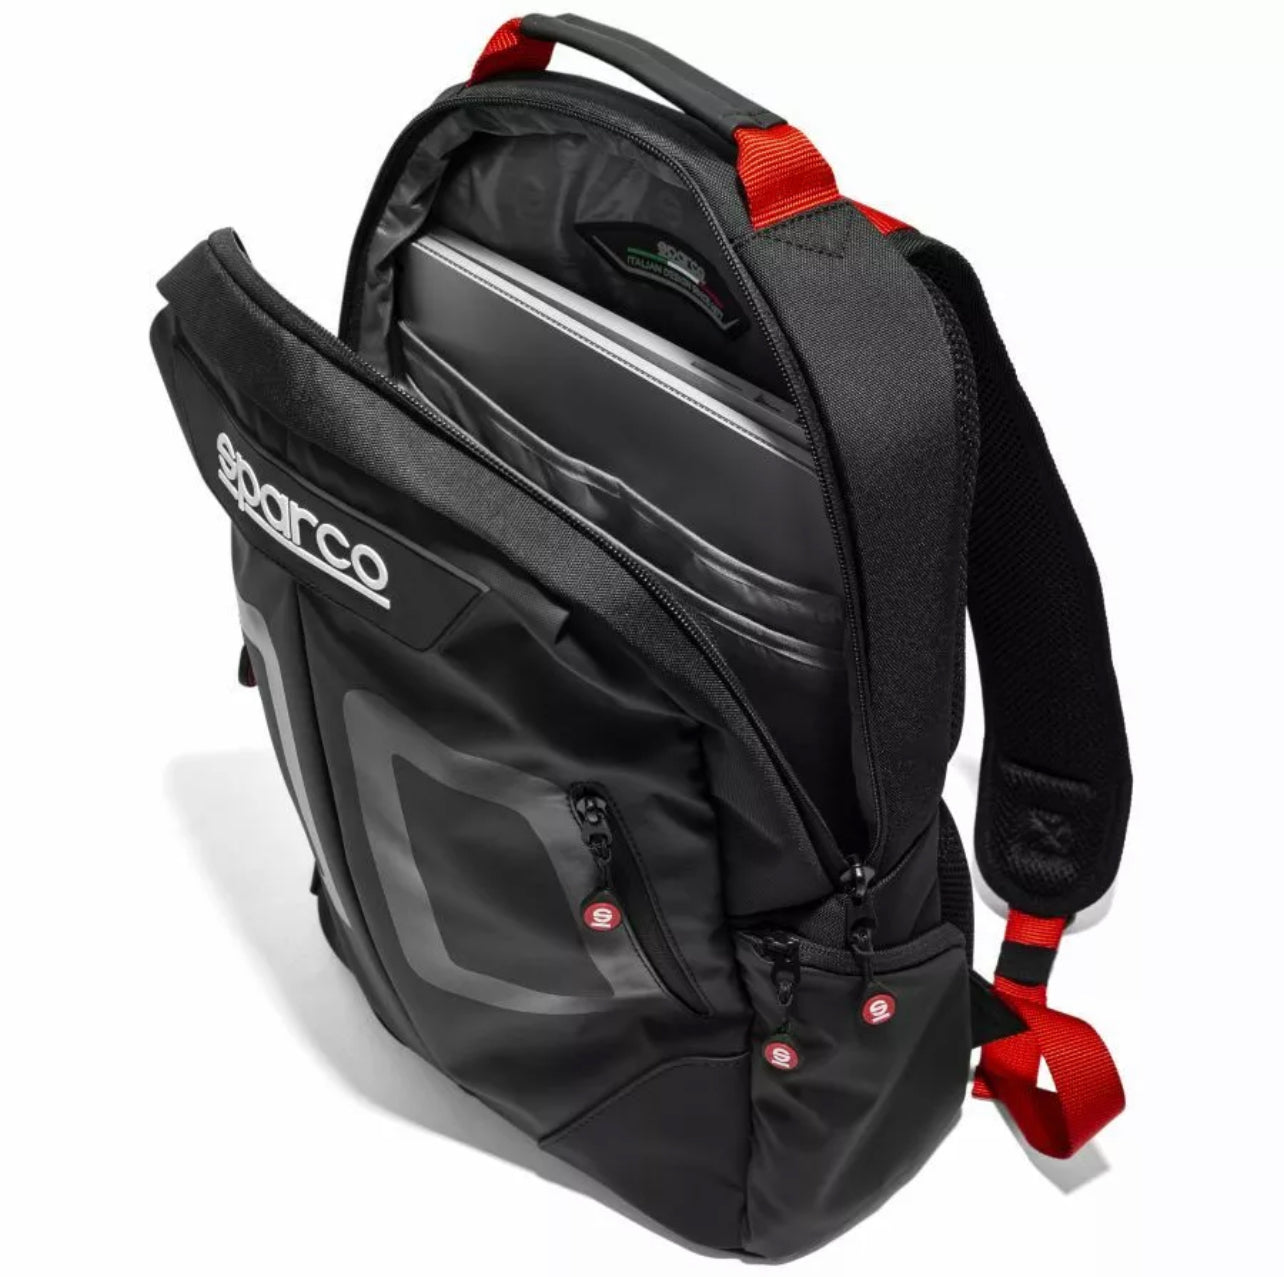 Sparco Motorsport Stage Black/Red Rucksack 15L Capacity to Fit 15" Laptop Perfect for School too!!